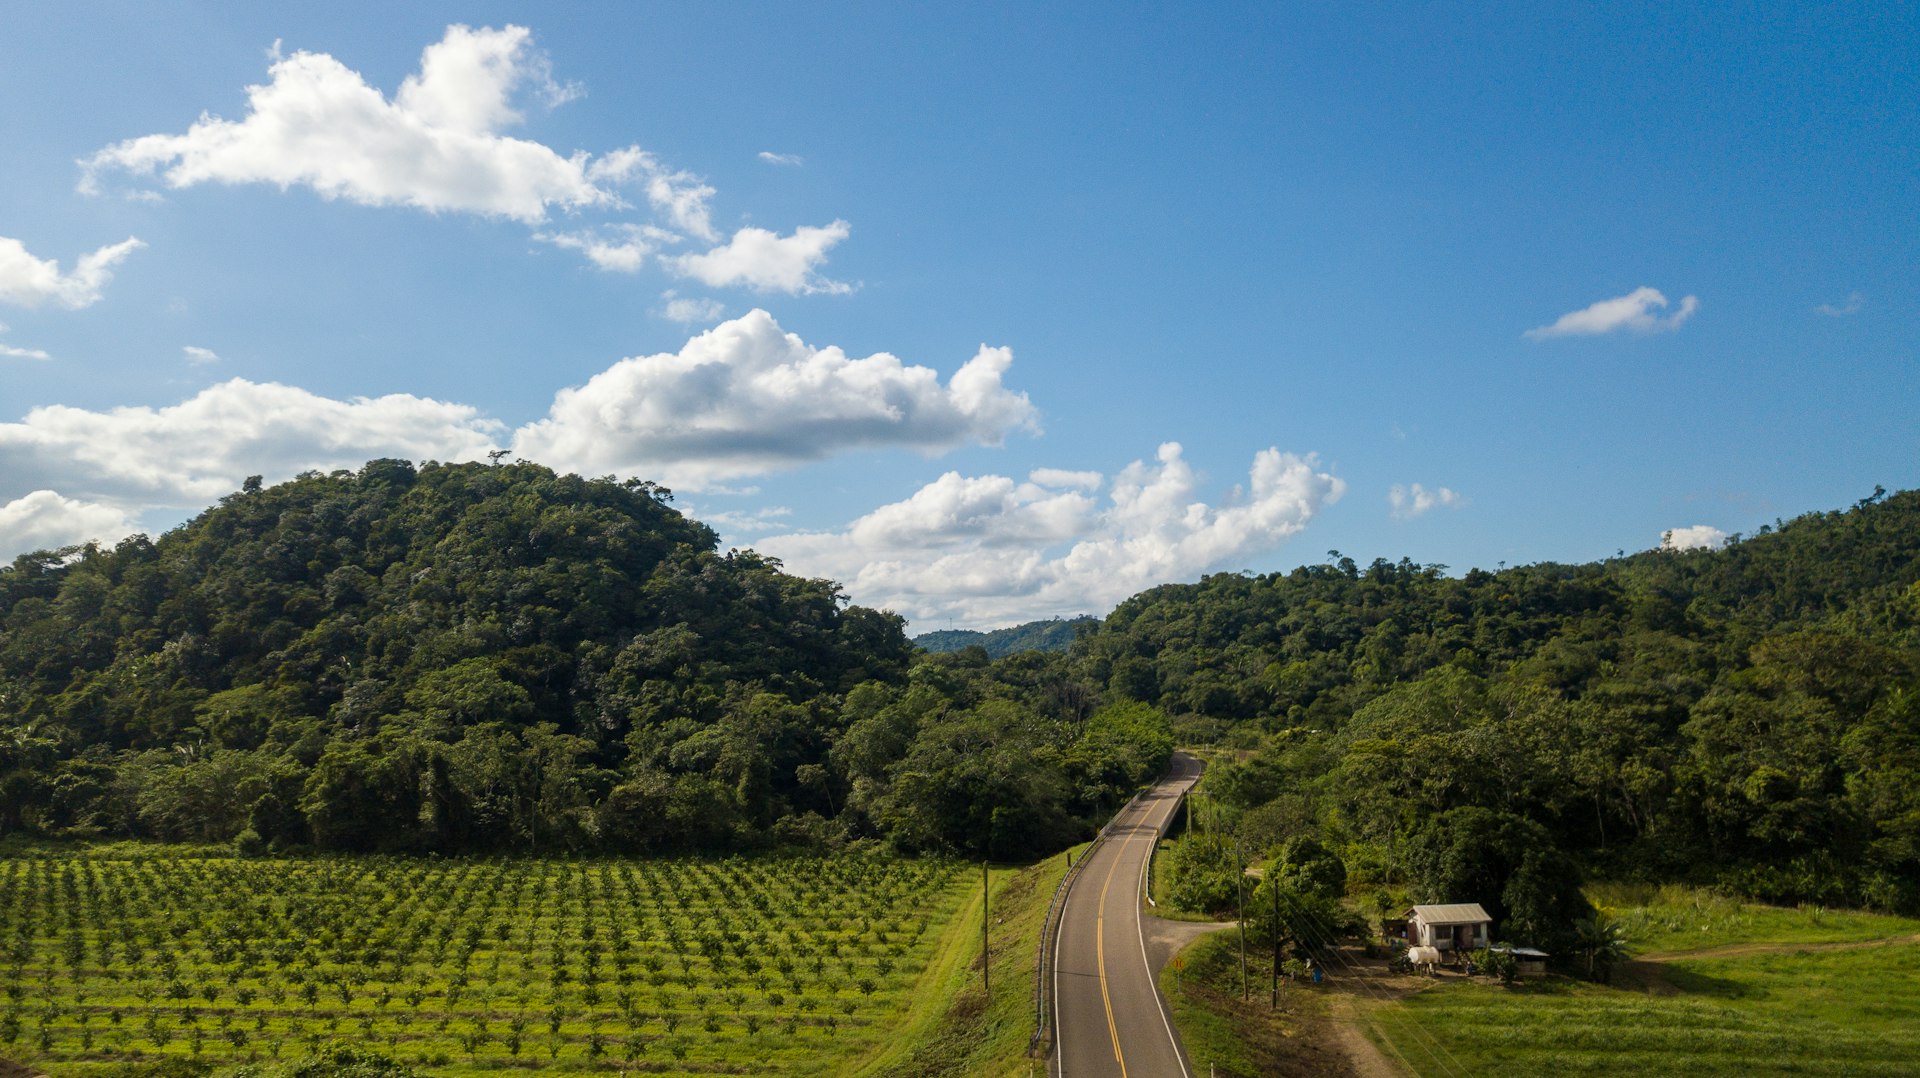 A road winds through a scenic landscape of lush farmland and woodland in Belize